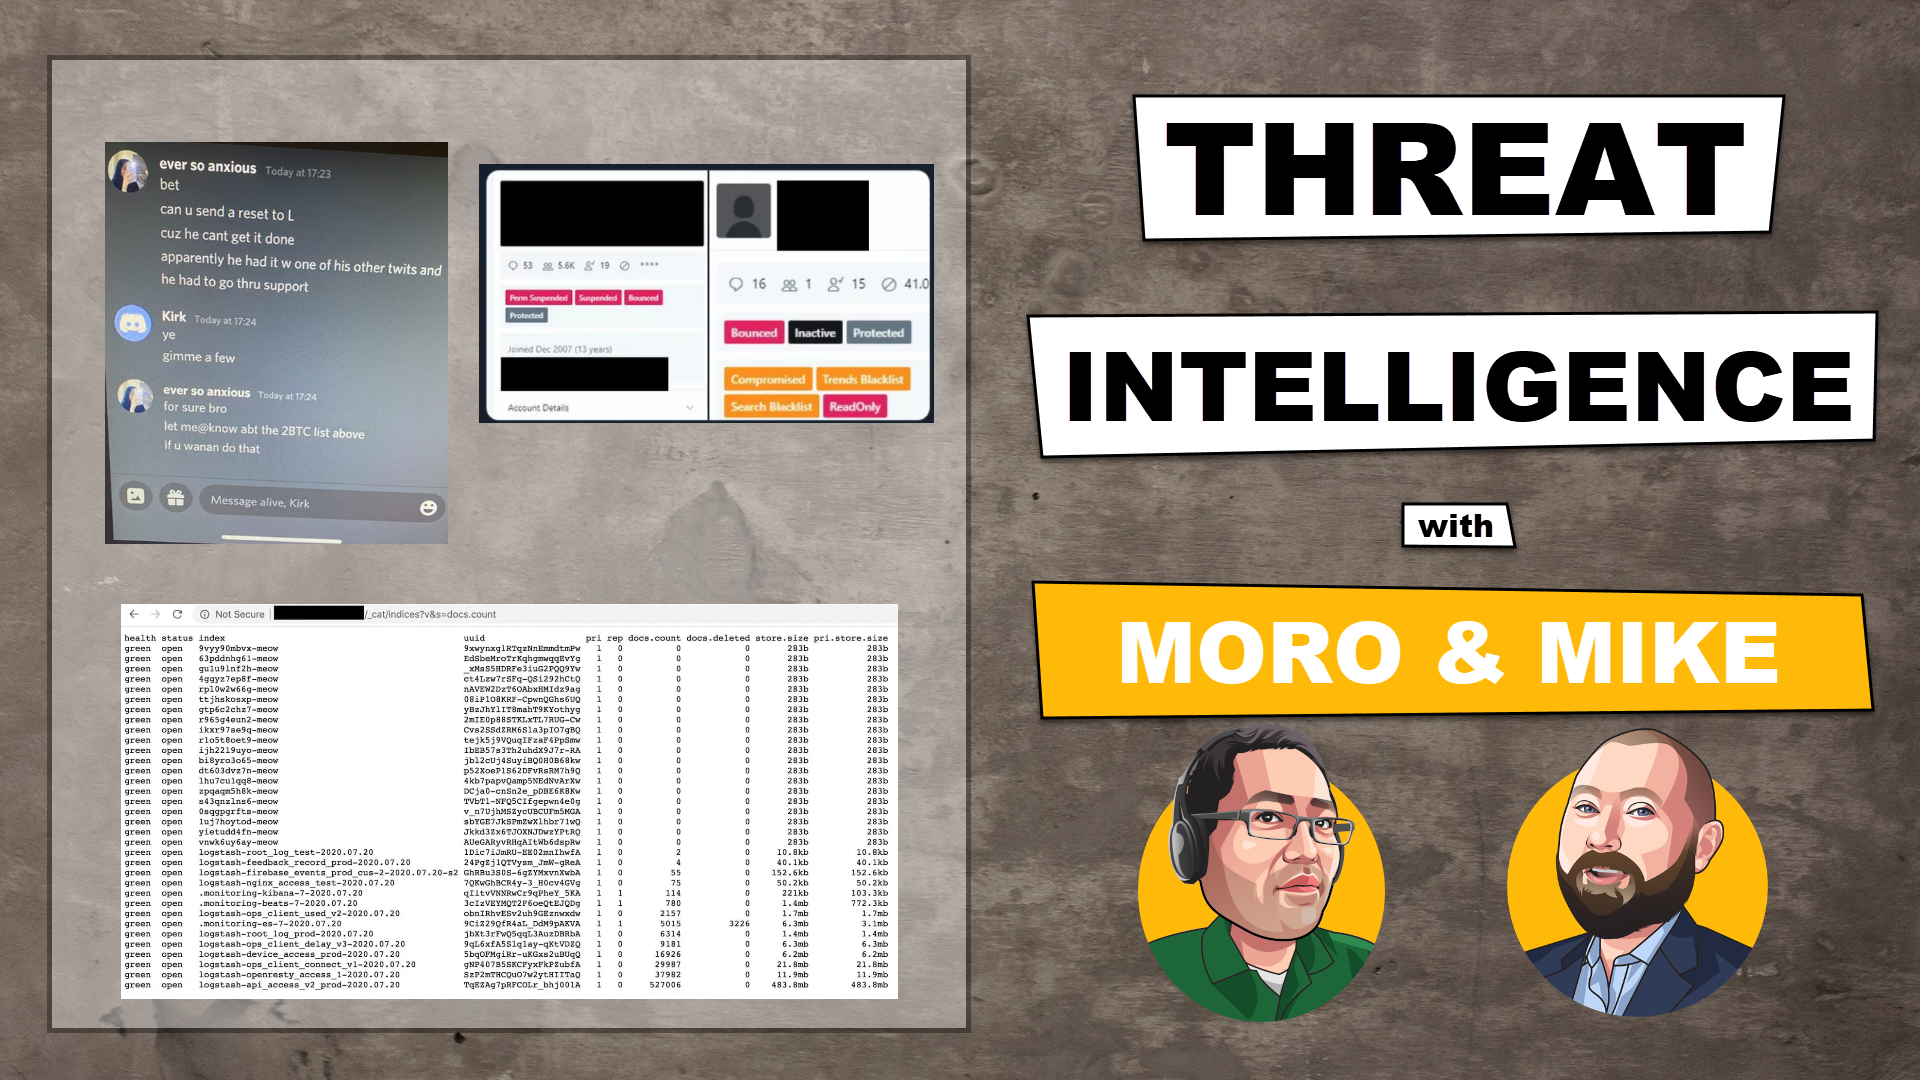 thumbnail for Threat Intelligence July 2020 youtube video